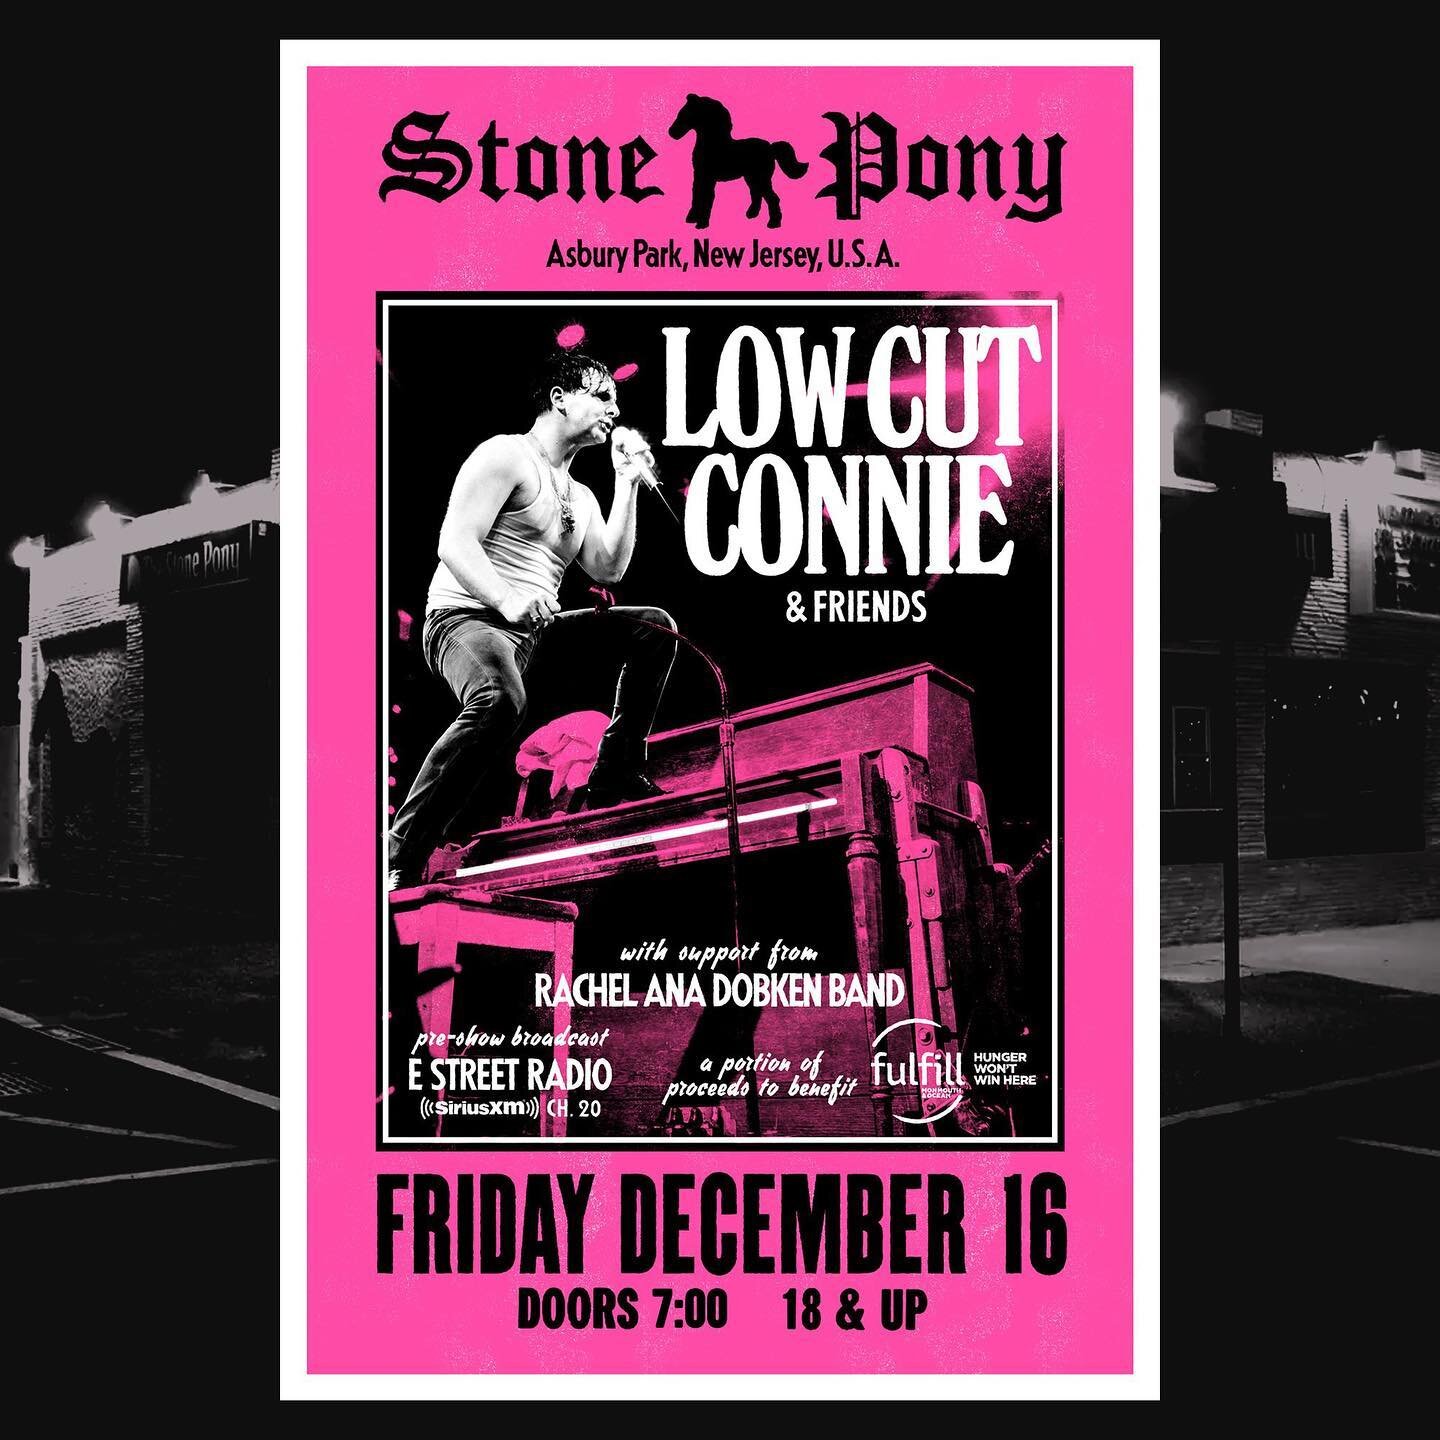 One week away from our show w/ @lowcutconnie @the_stone_pony ! Won&rsquo;t you please join us for our last &amp; most epic one of 2022? ✨

RAD Band is #rachelanadobken @drhaase @erikrudic @joey_prince_ + special guests. 7p doors, show starts promptly